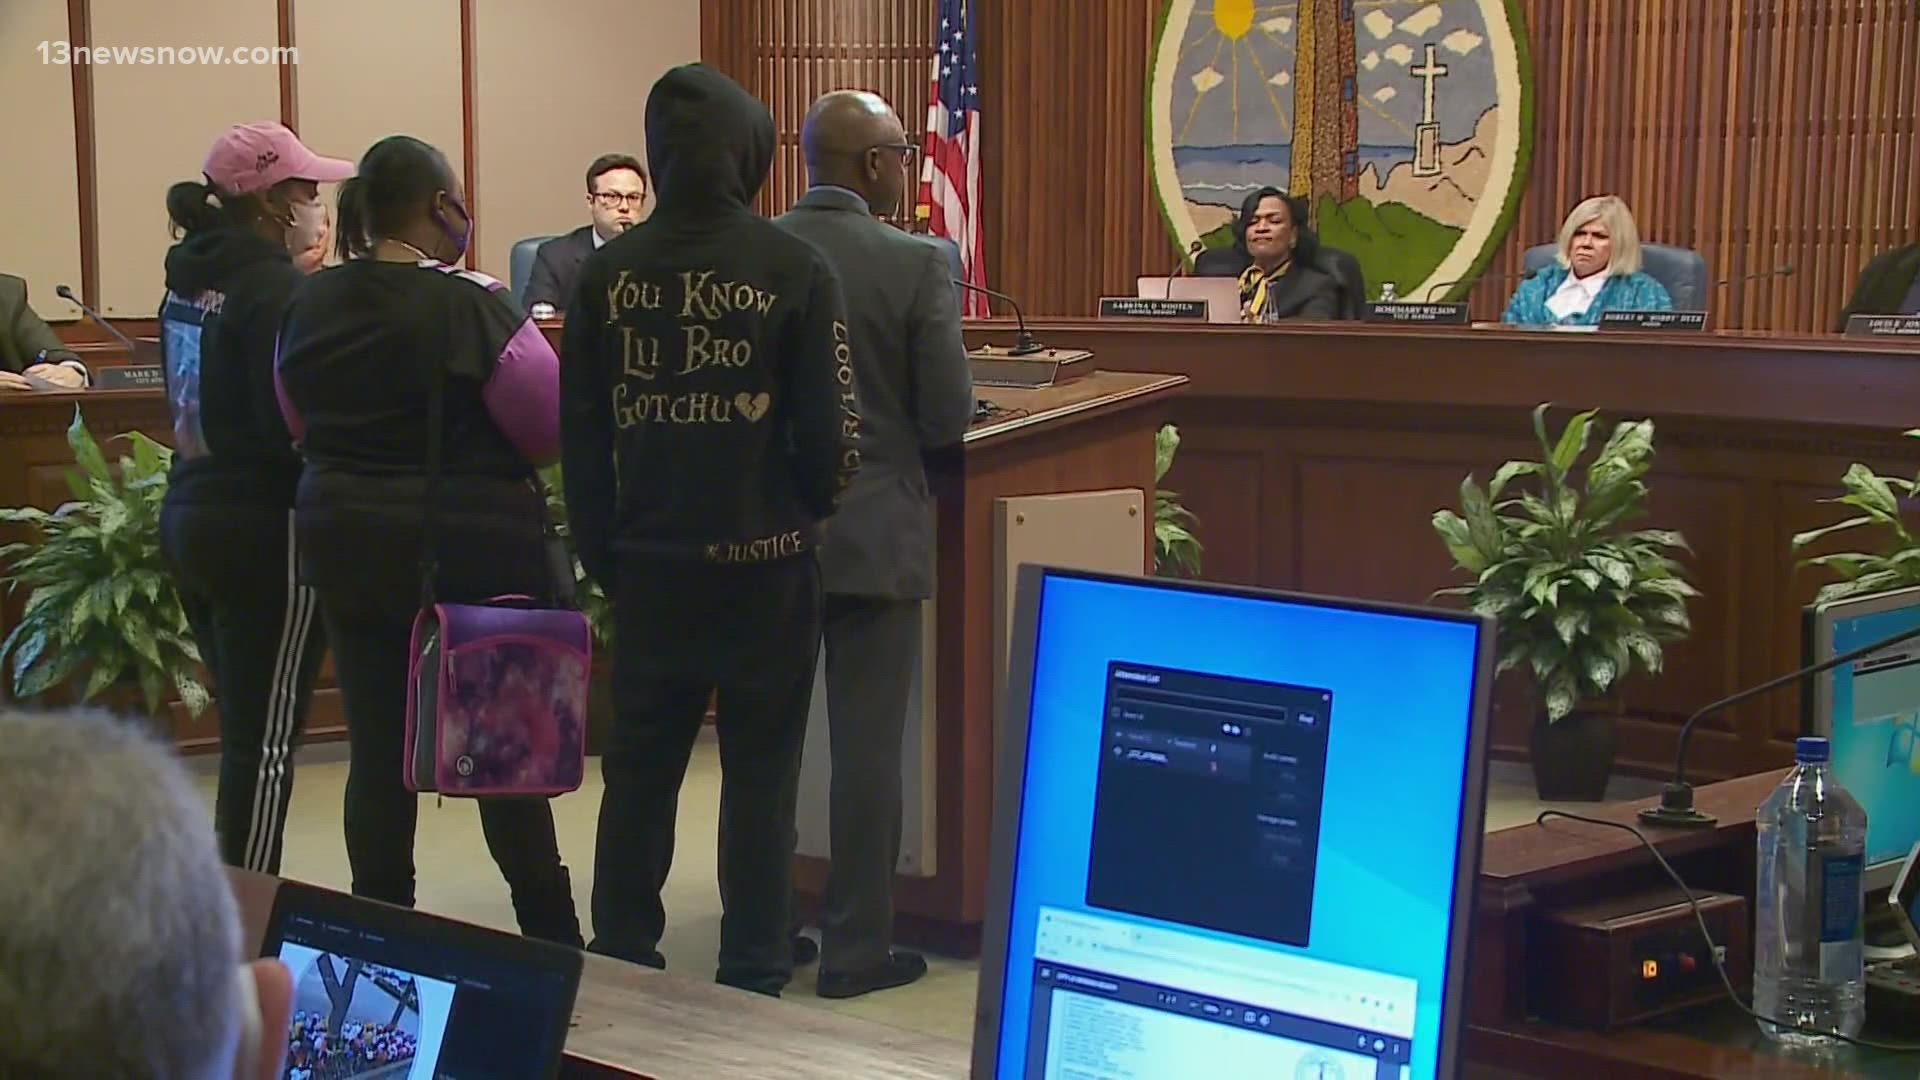 The family of DeShayla Harris talked to Virginia Beach City Council members about creating a memorial to honor Harris.